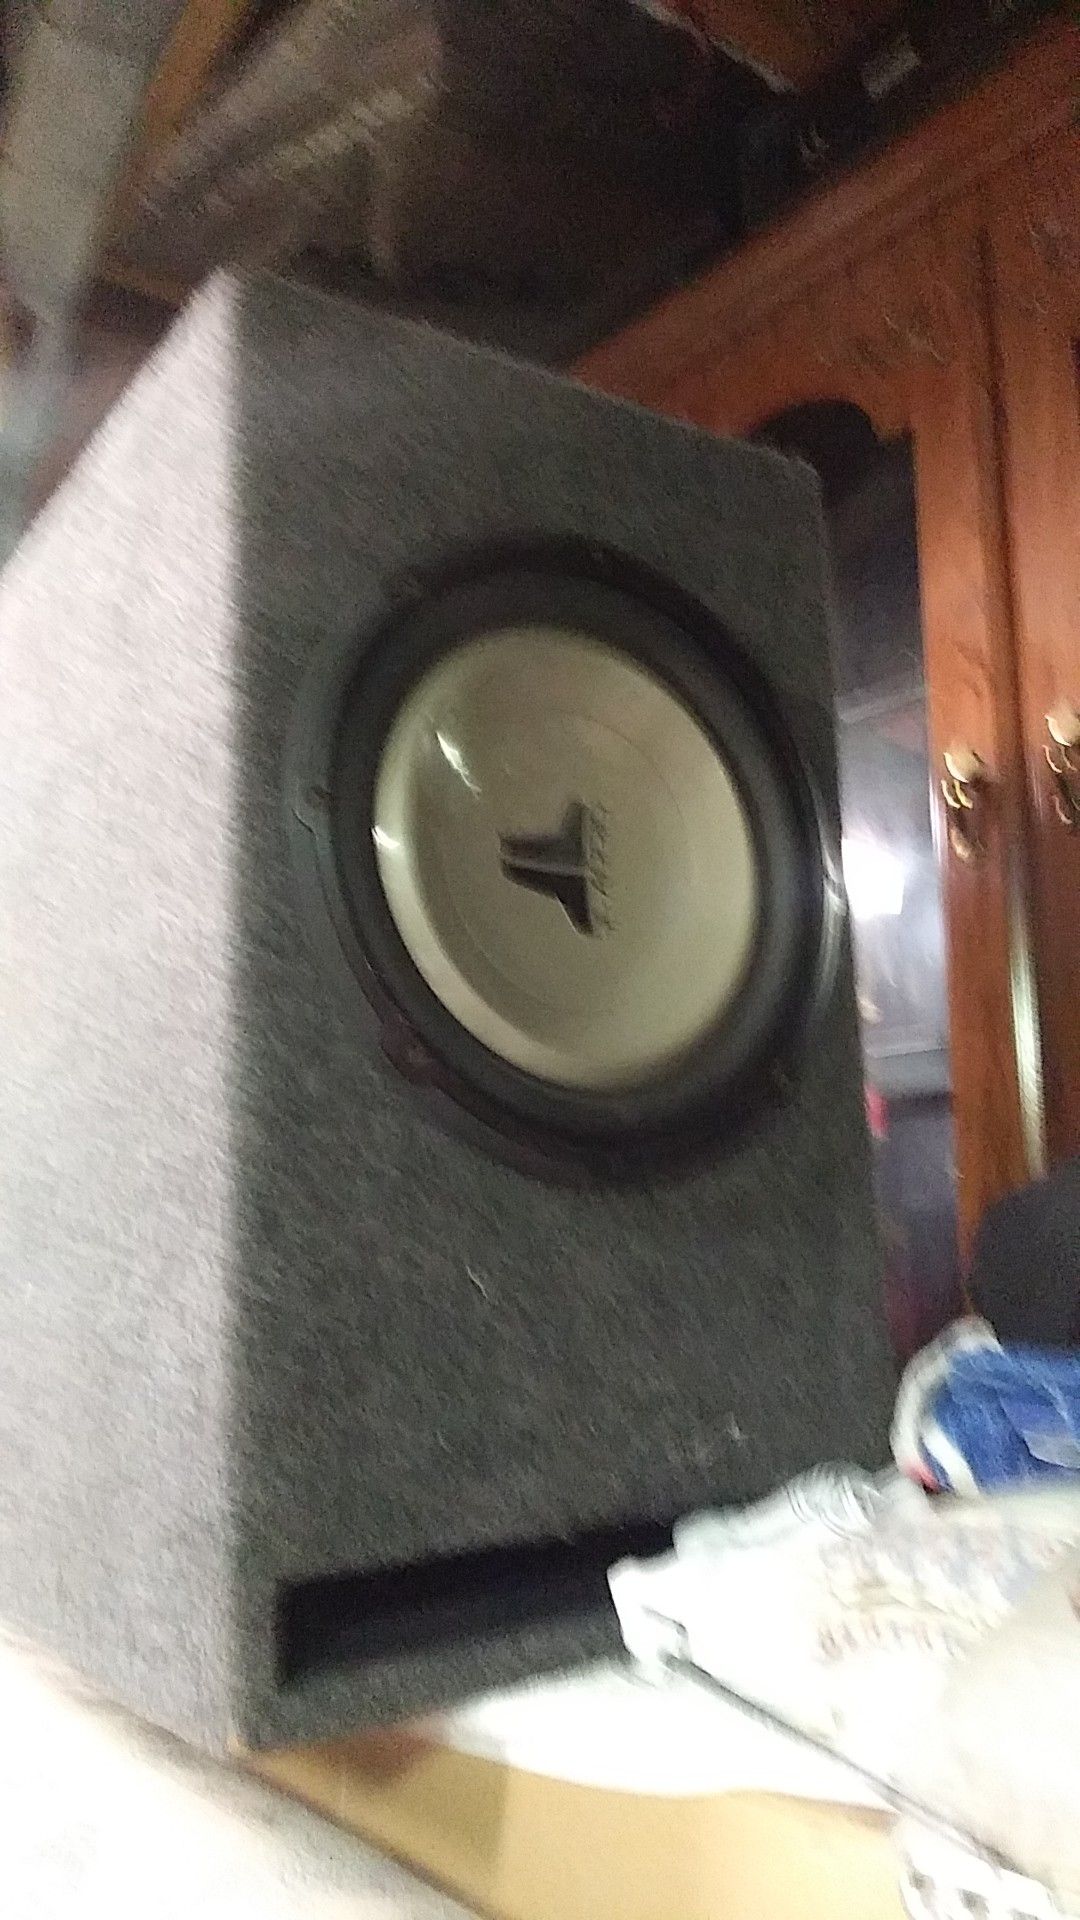 JL audio 12 inch bass speaker ported to specs